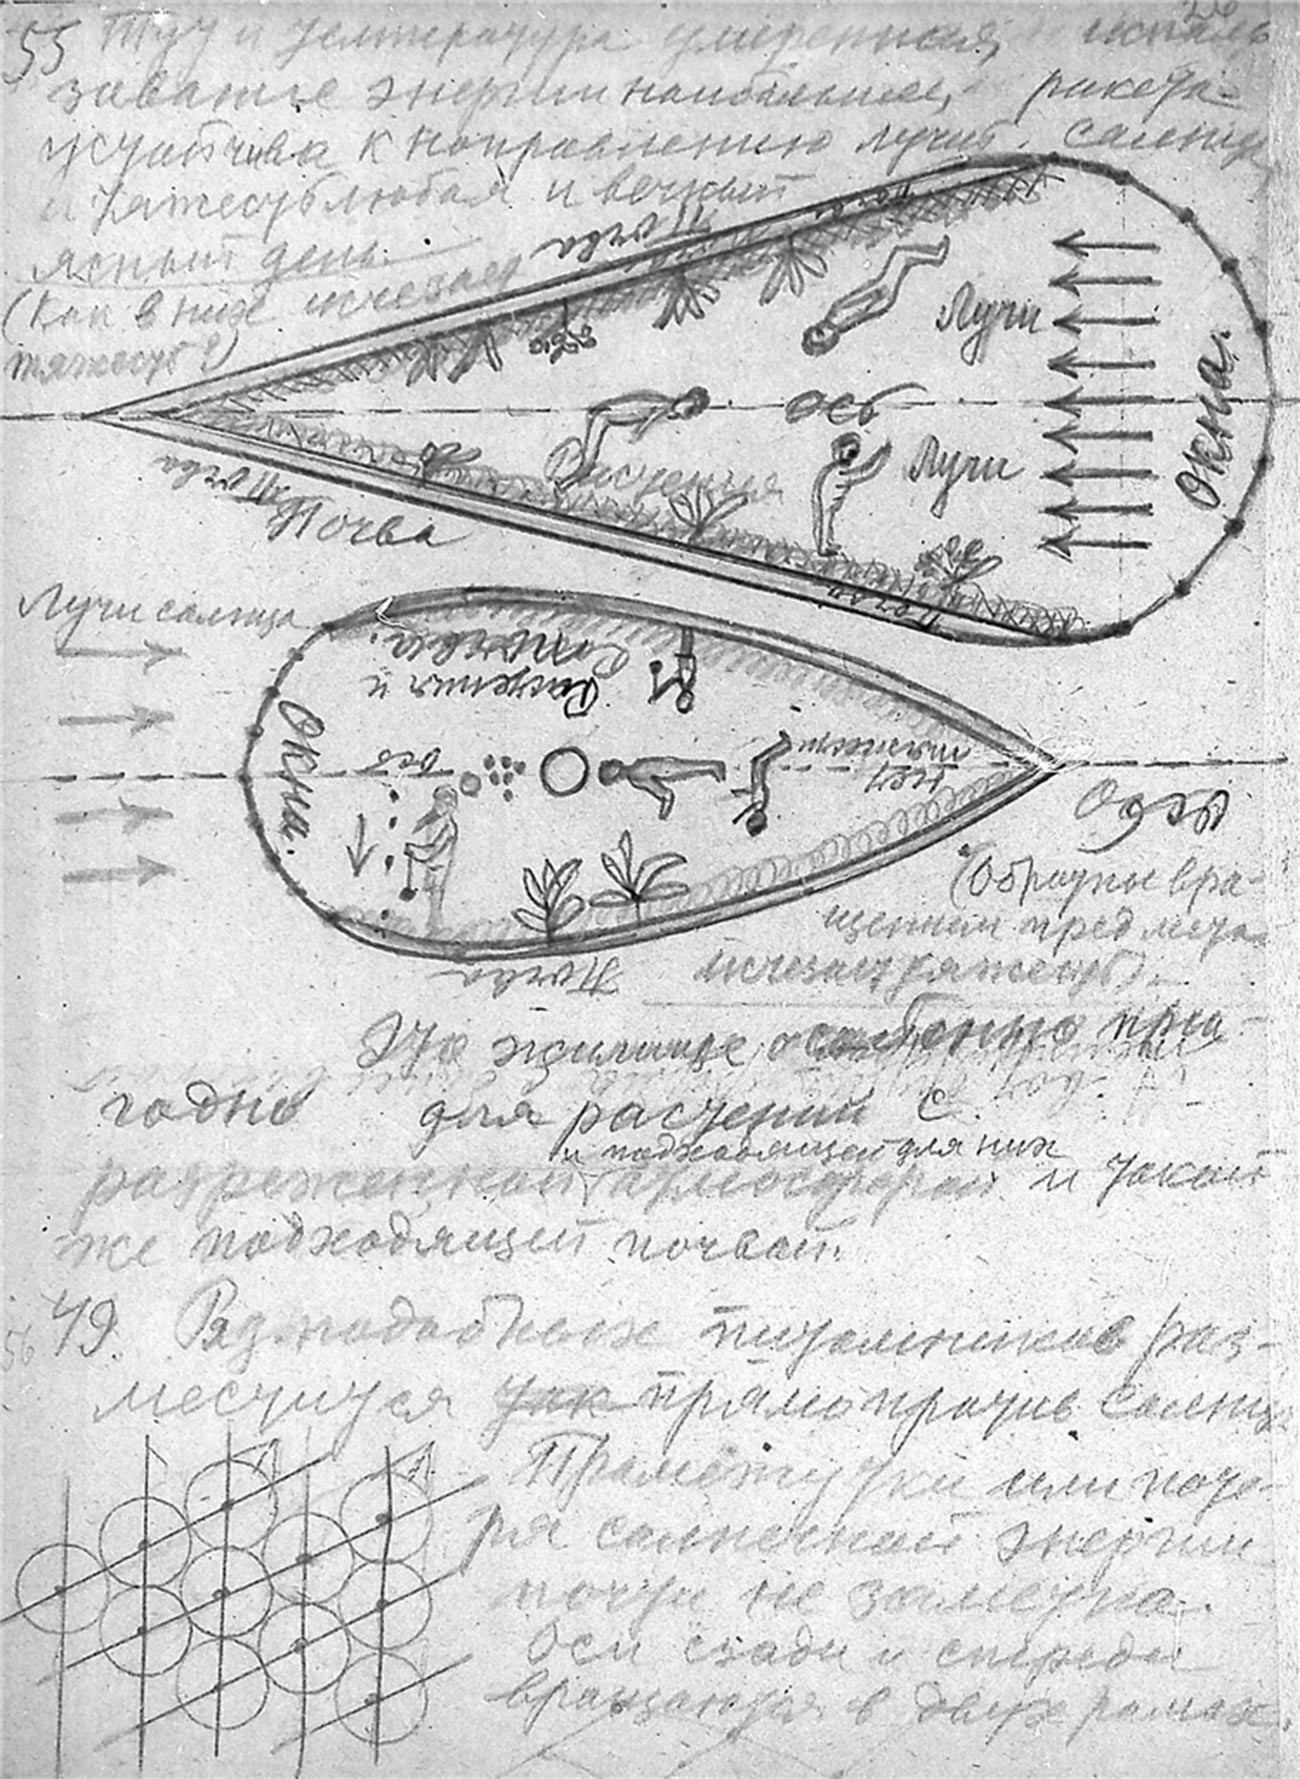 Tsiolkovsky's description and drawing of a spaceship greenhouse